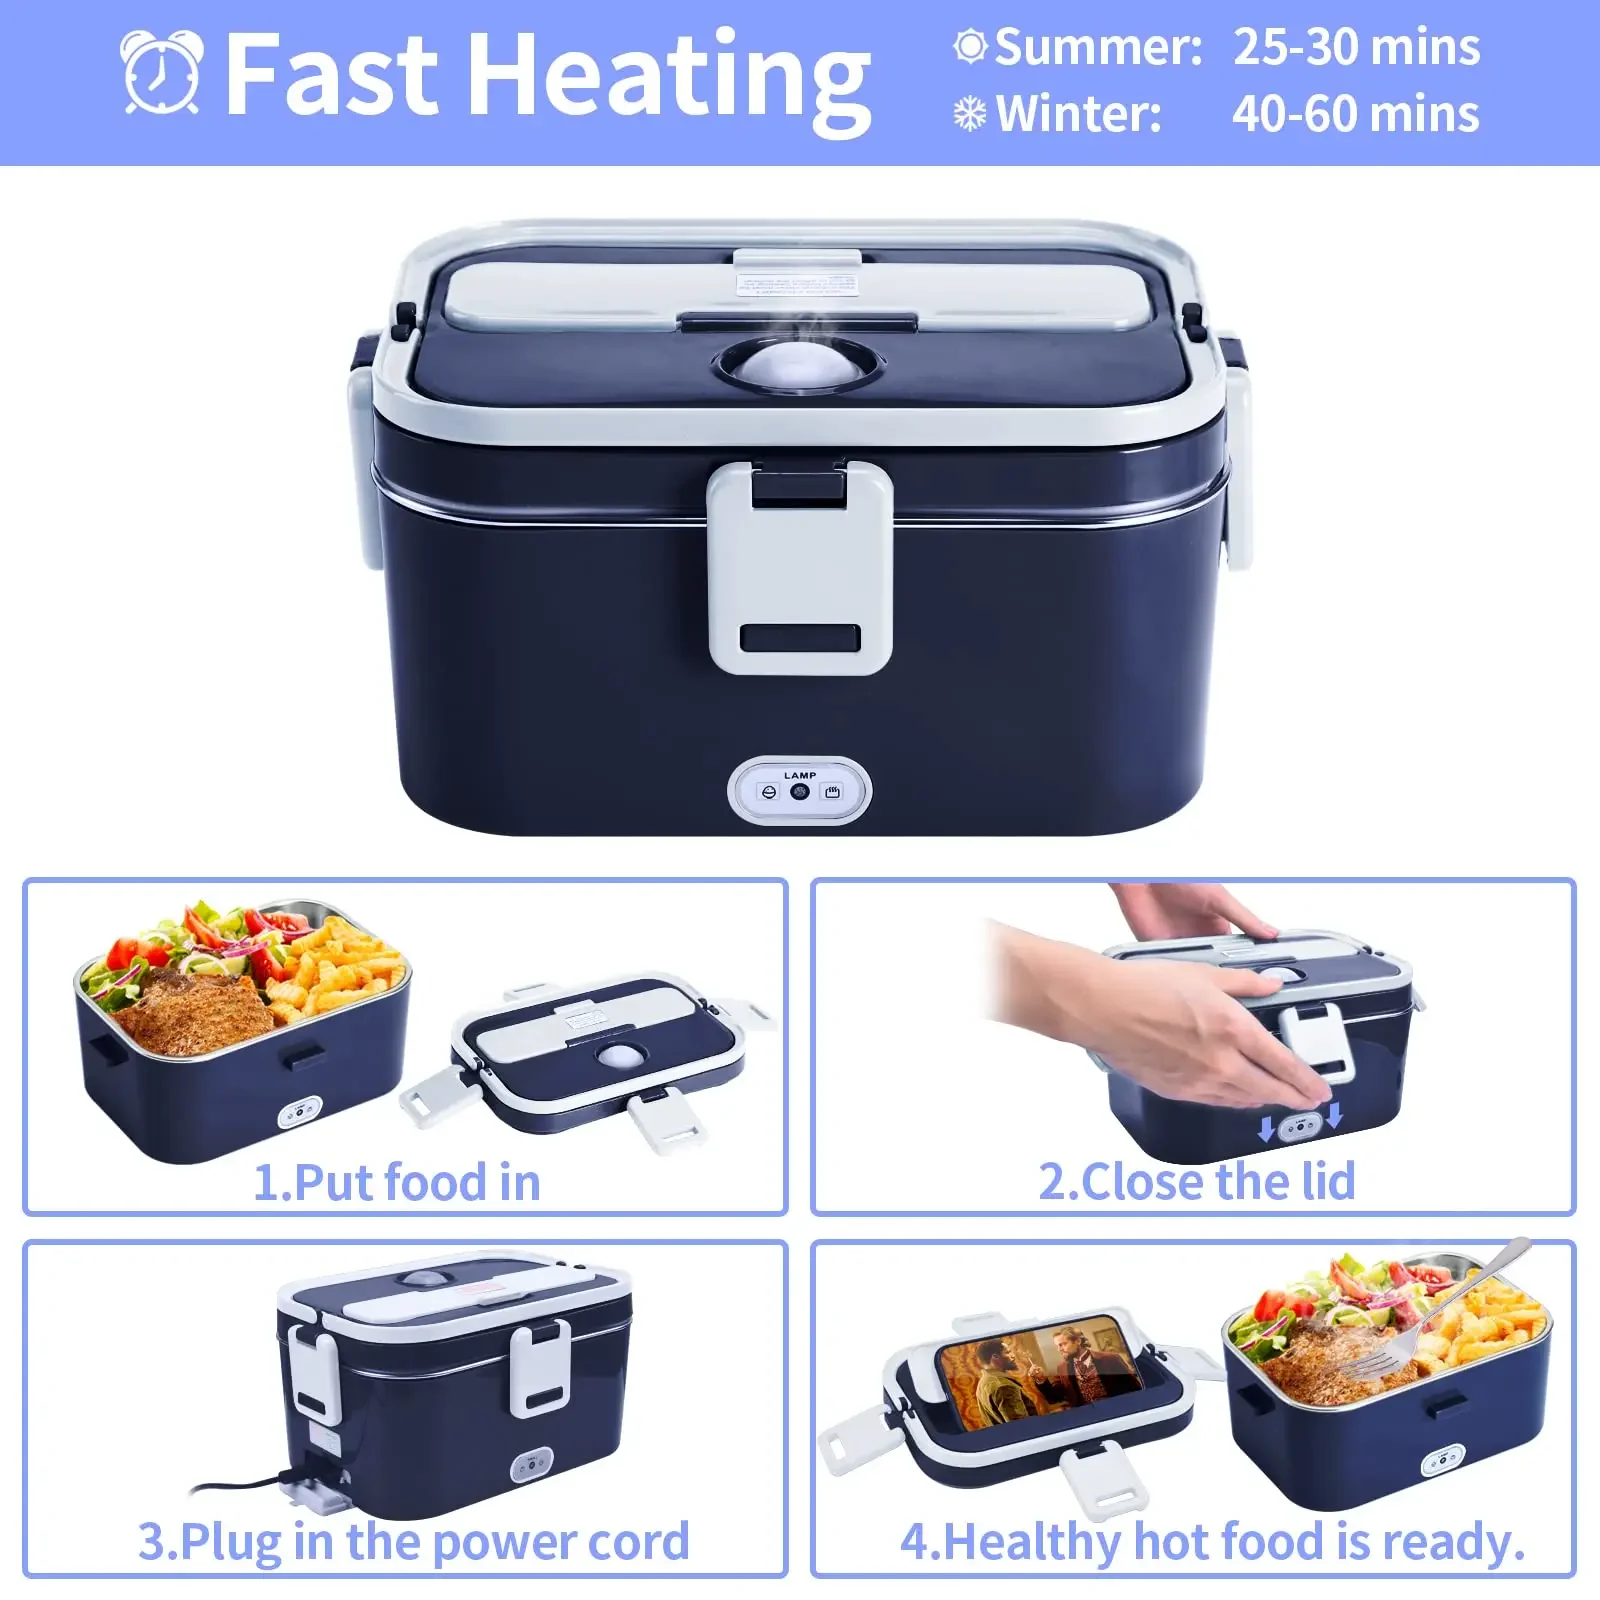 https://ae01.alicdn.com/kf/S768c965487504caea04e4967e4aa4e0at/Electric-Lunch-Box-60W-Food-Heater-110-230V-Portable-Lunch-Warmer-1-8L-Large-Capacity-Heated.jpg